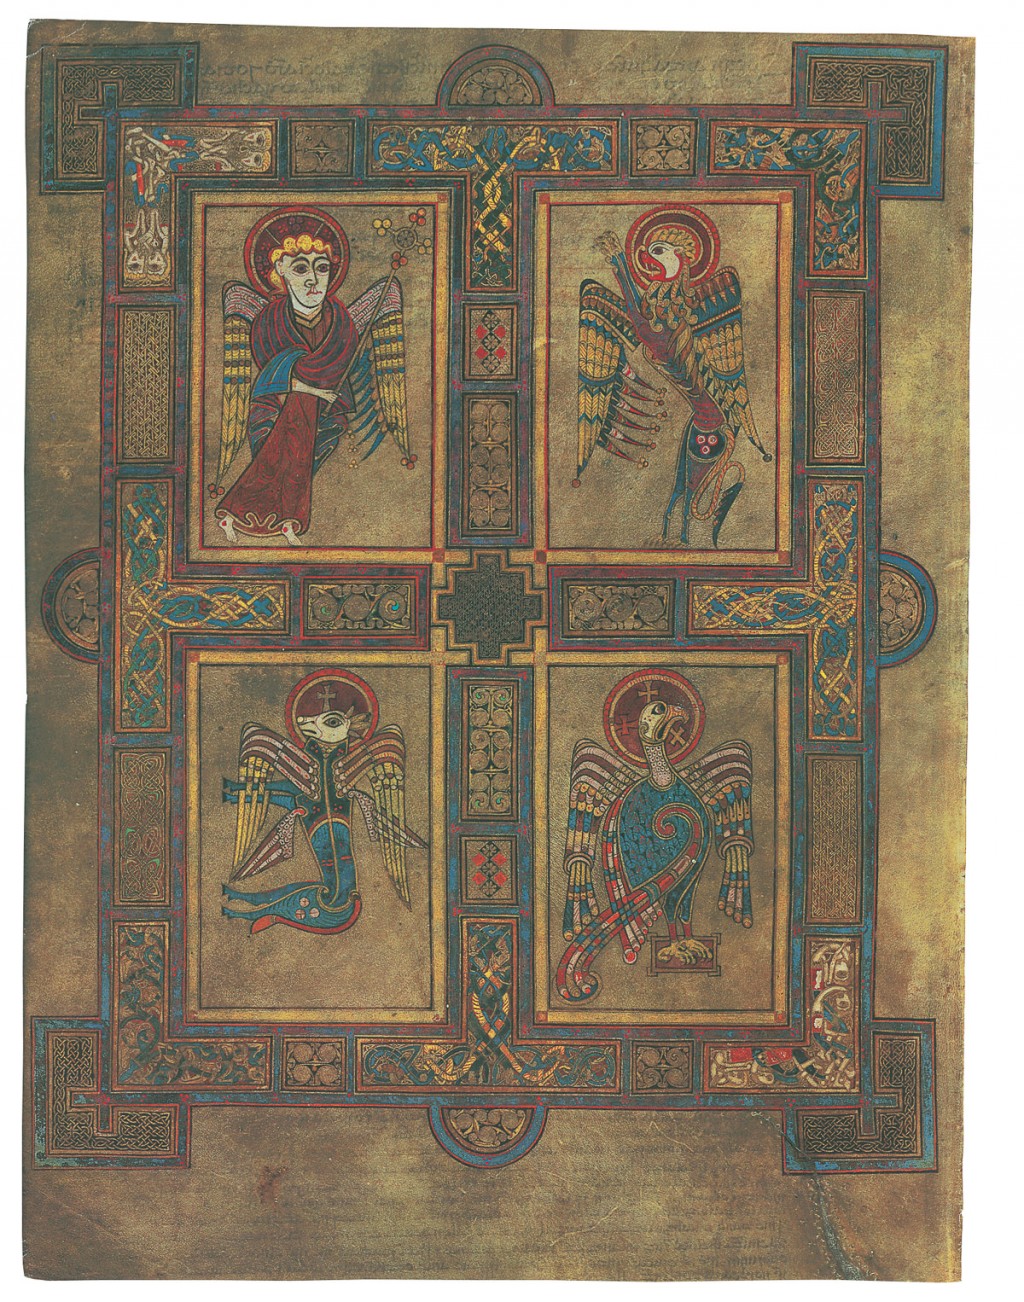 Illuminated page from The Book of Kells